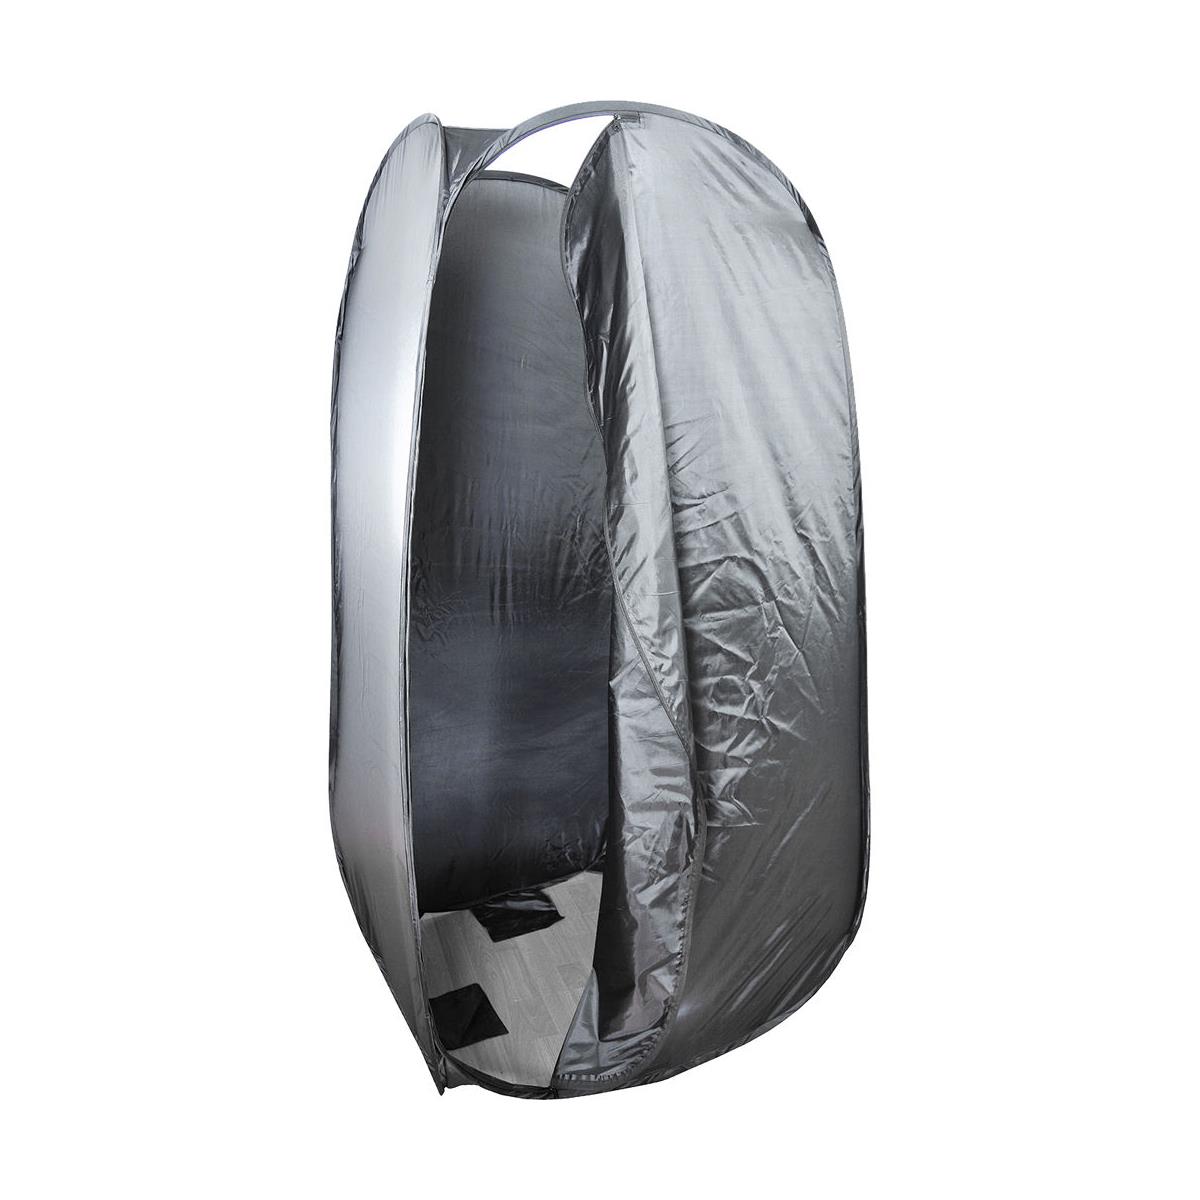 Photos - Other for studios Godox Portable Tent DT-01 